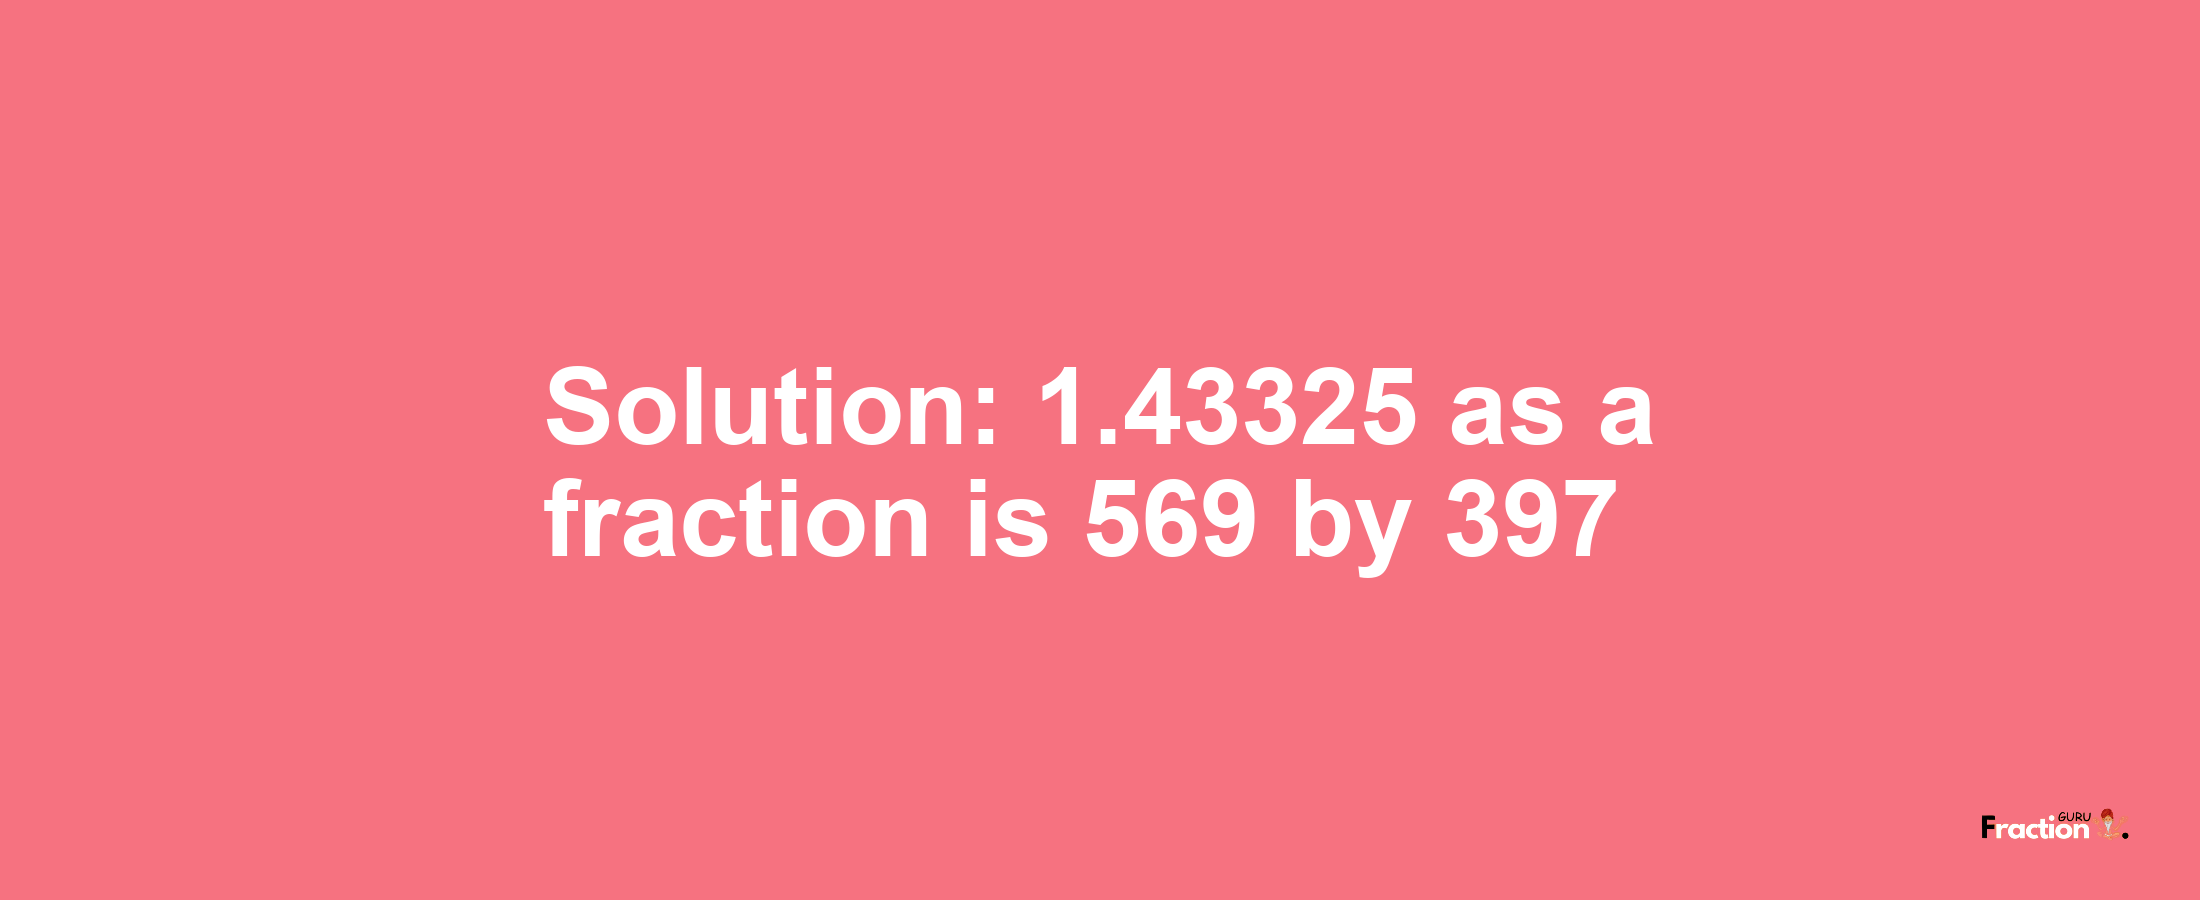 Solution:1.43325 as a fraction is 569/397